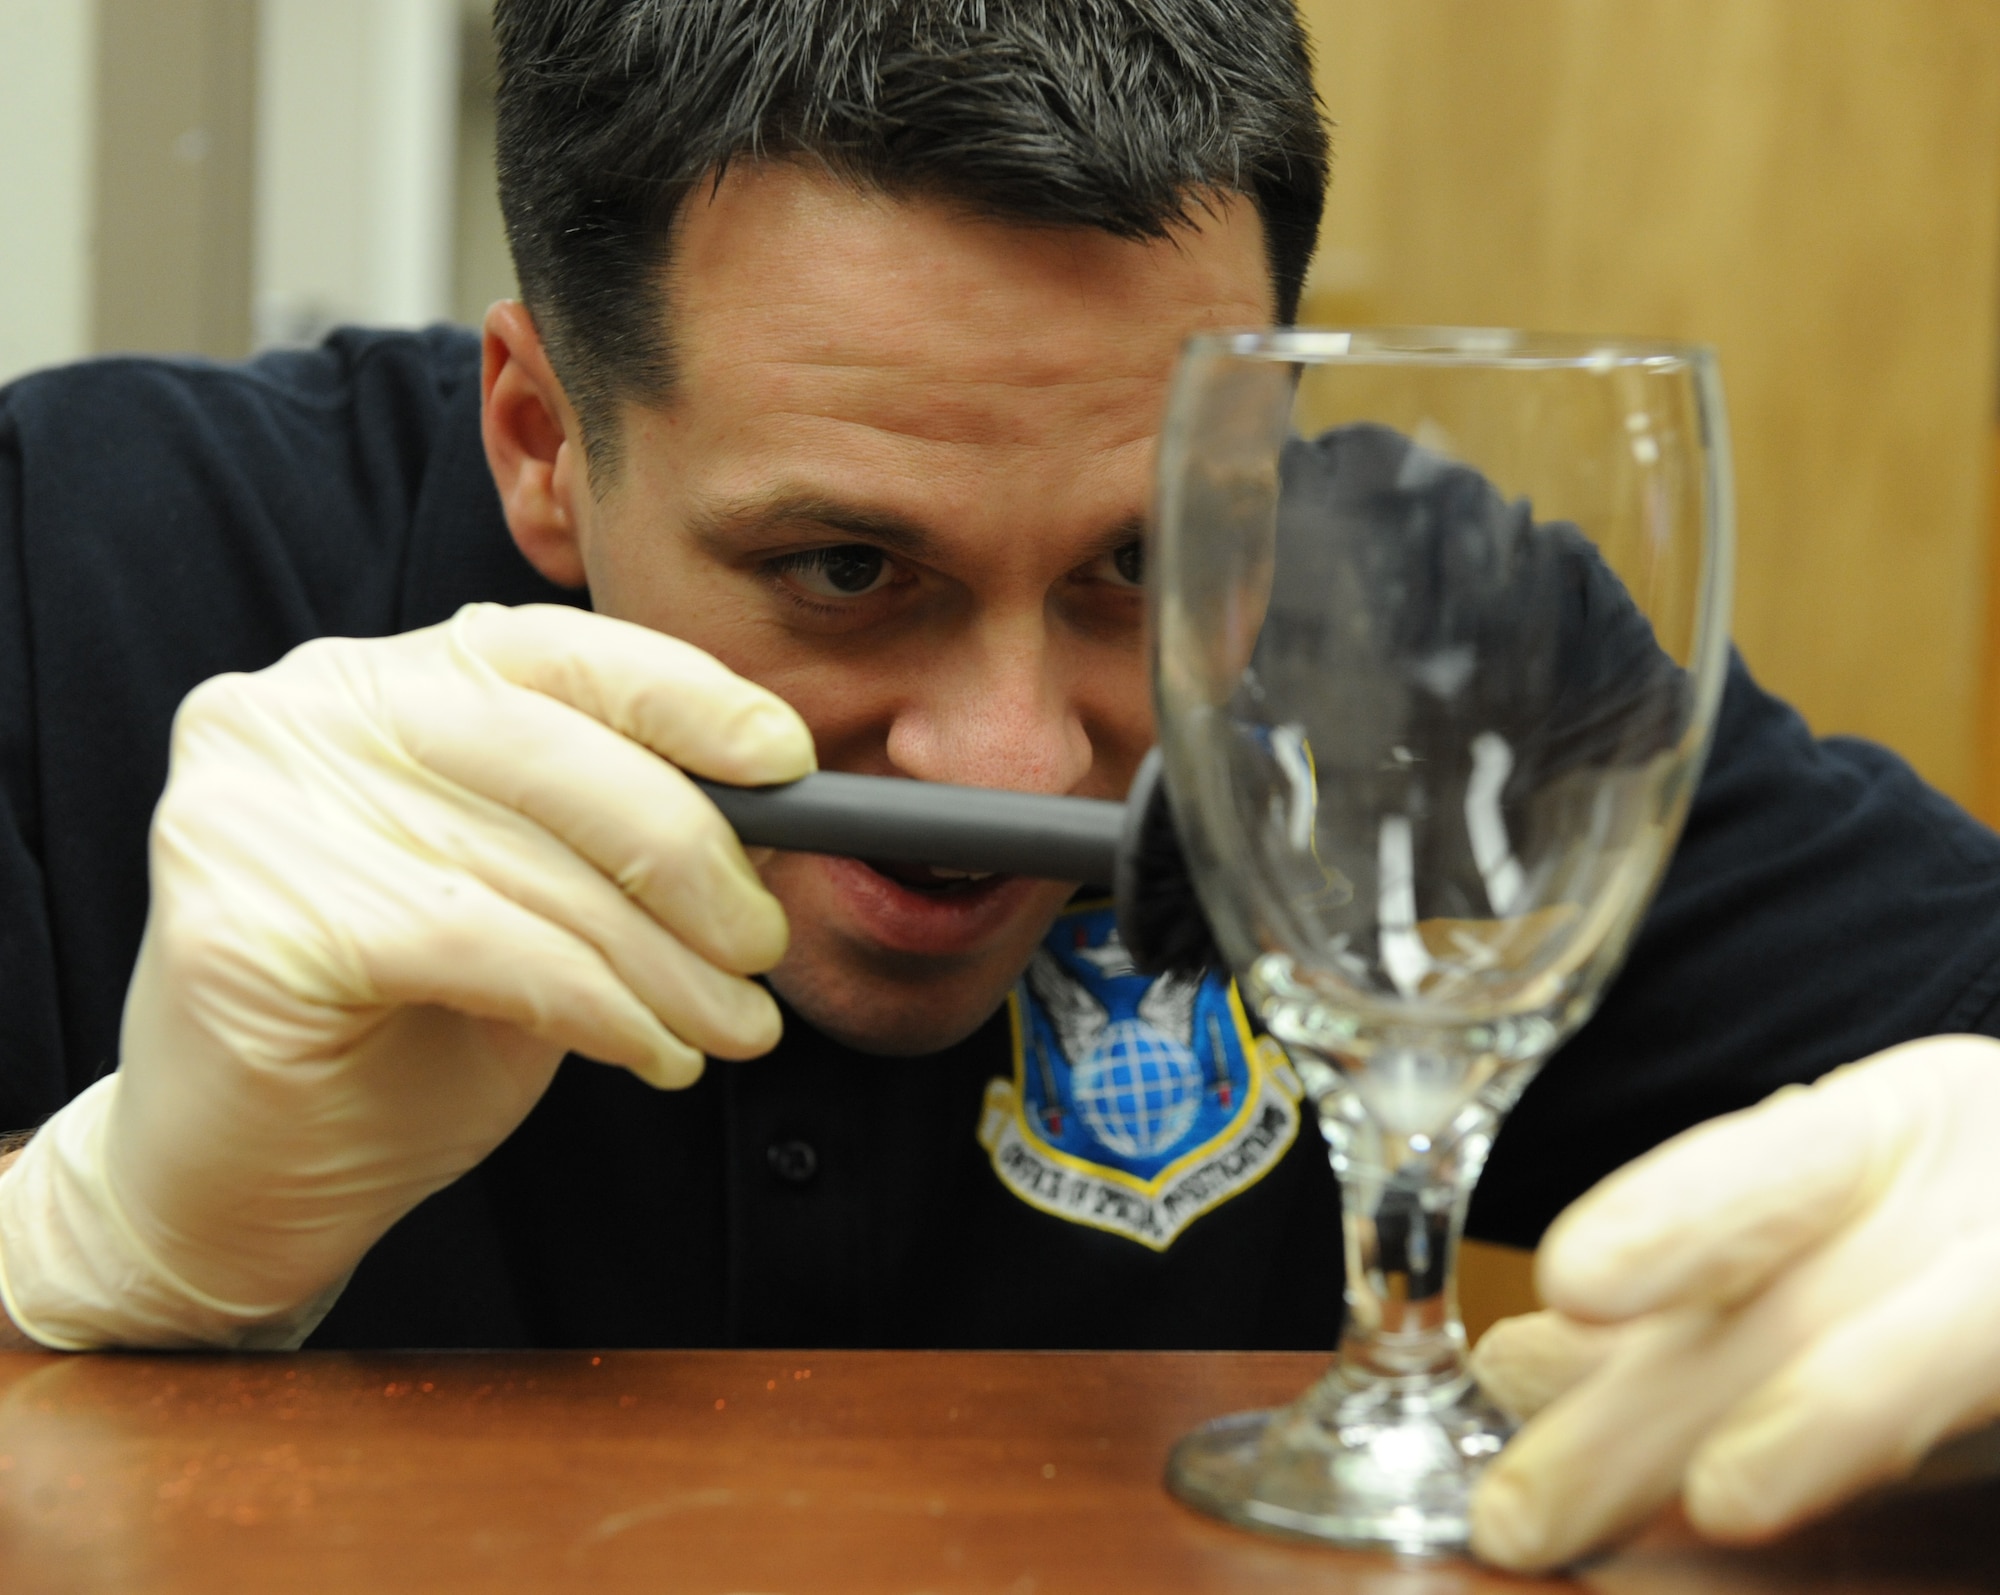 Special Agent Adam Deem, Air Force Office of Special Investigation Detachment 219, dusts a glass for fingerprints on Barksdale Air Force Base, La. Dusting for finger prints involves dusting with fine particles of the powder to adhere to residue left by skin from palms, fingers and feet. (U.S. Air Force photo by Airman 1st Class Micaiah Anthony)